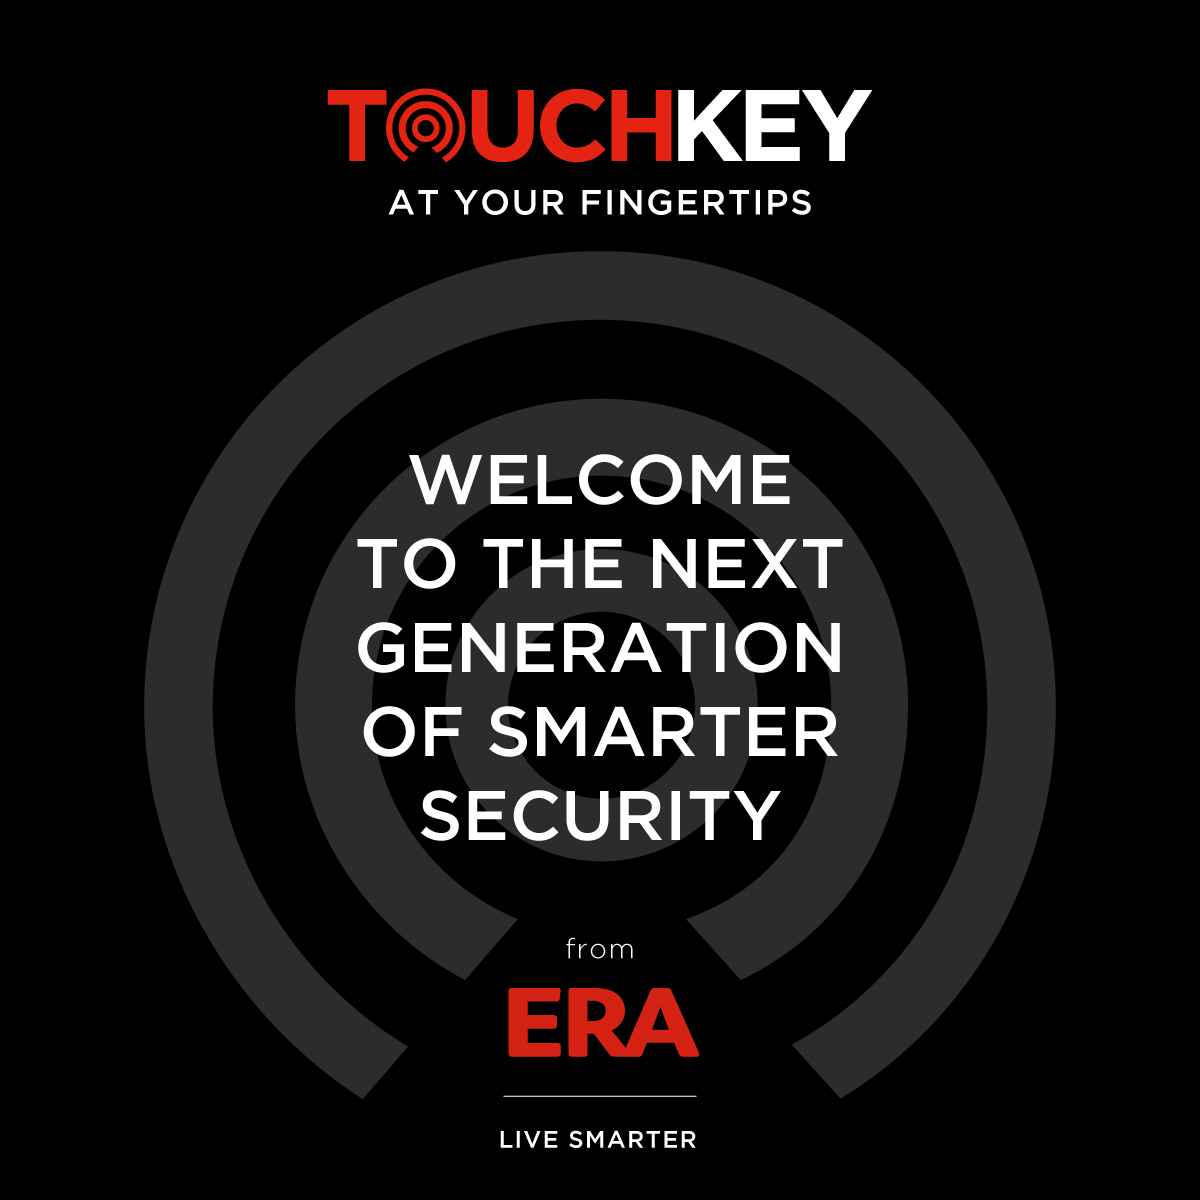 ERA is revolutionising the expectations and capabilities of keyless entry with the launch of its versatile door security solution, TouchKey.